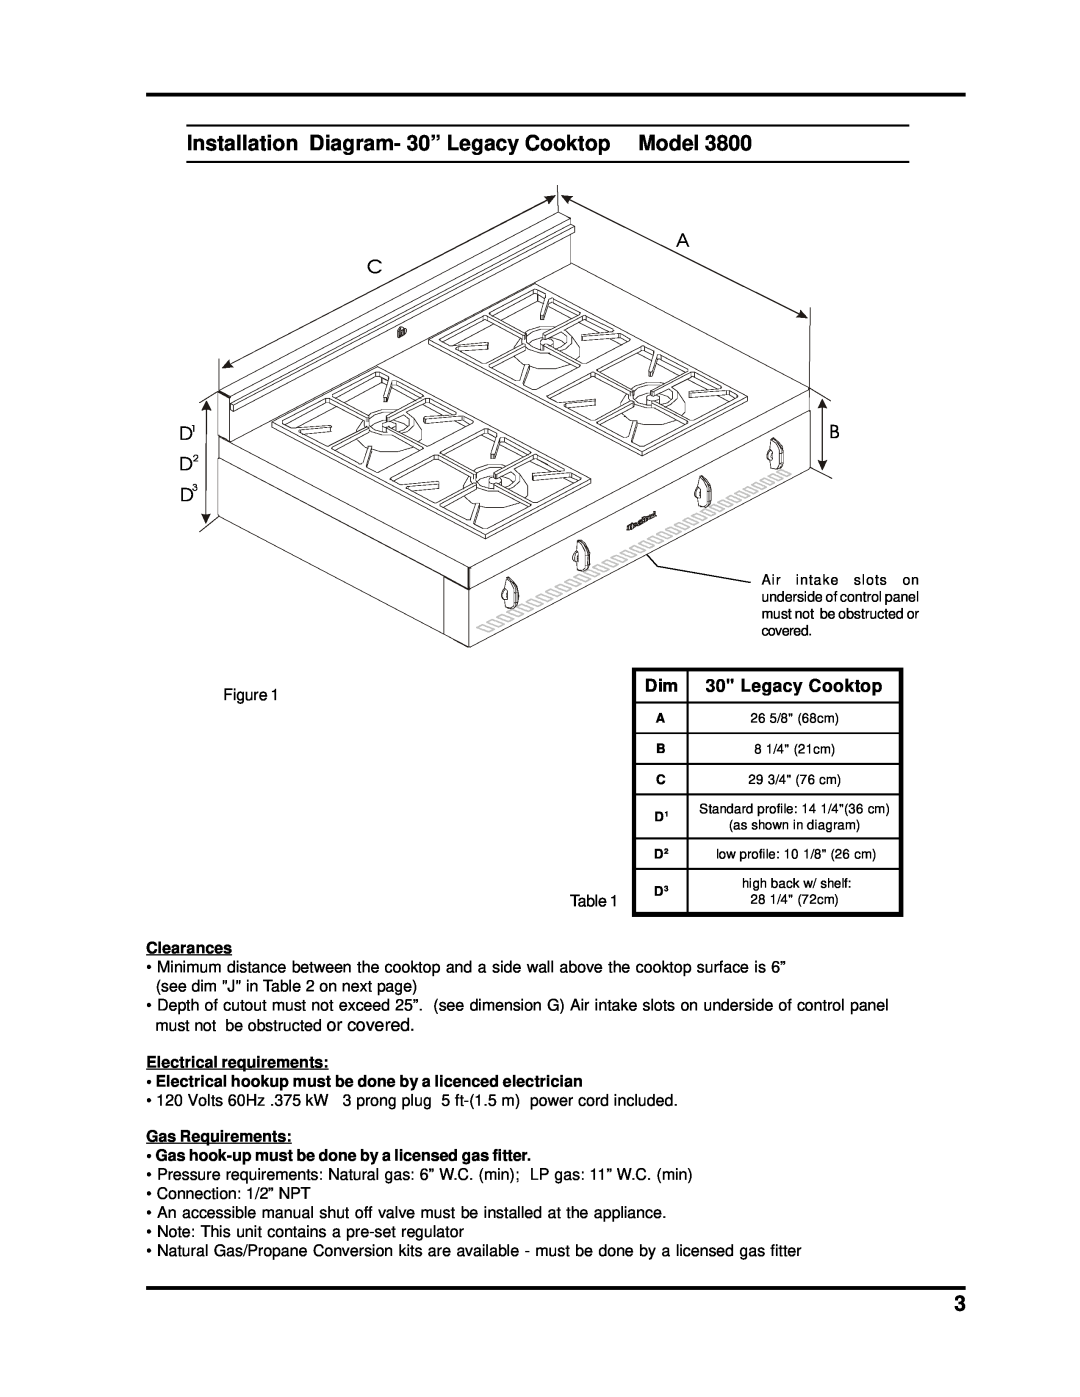 Heartland Bakeware 3805-3825 Installation Diagram- 30” Legacy Cooktop Model, D1 D2 D3, Clearances, Electrical requirements 